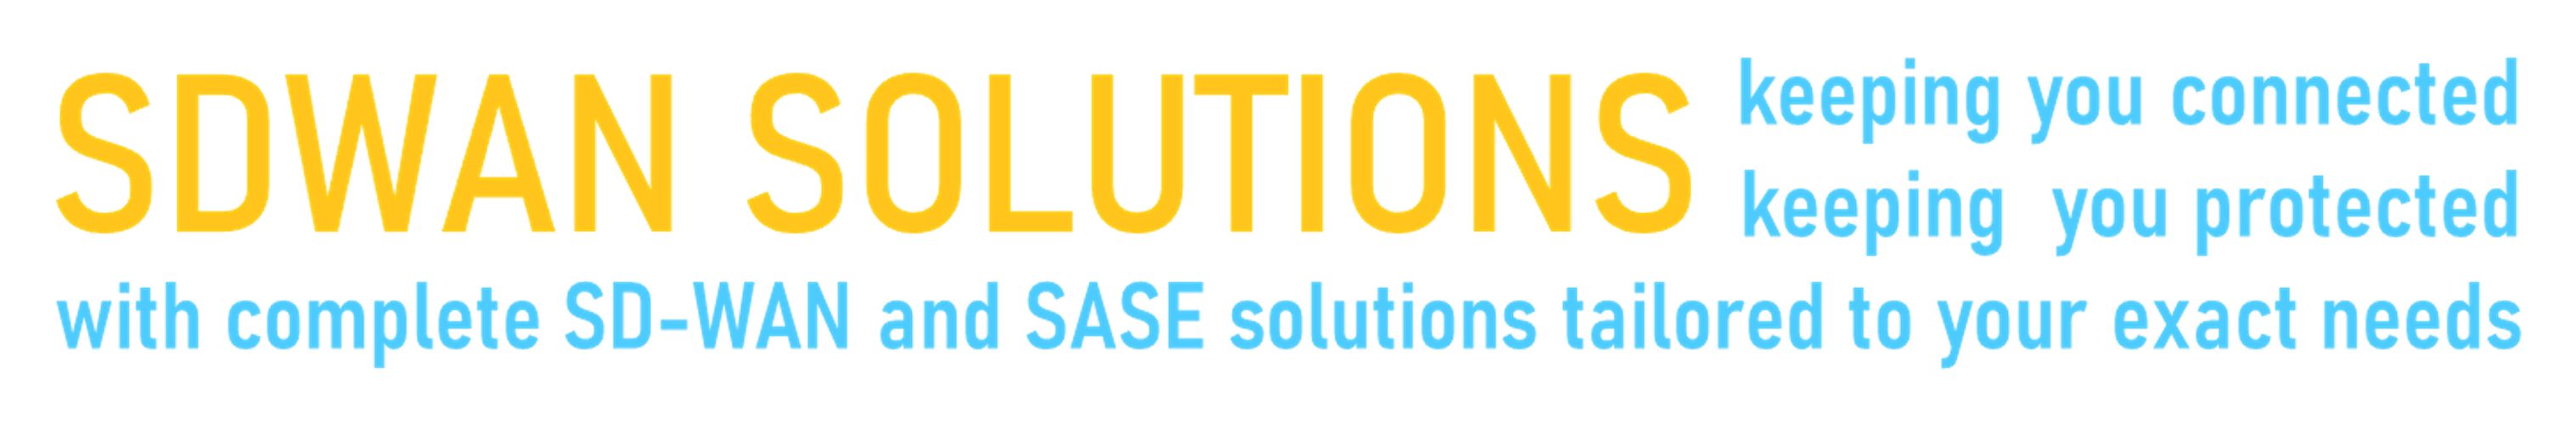 SDWAN Solutions SaSe Solutions